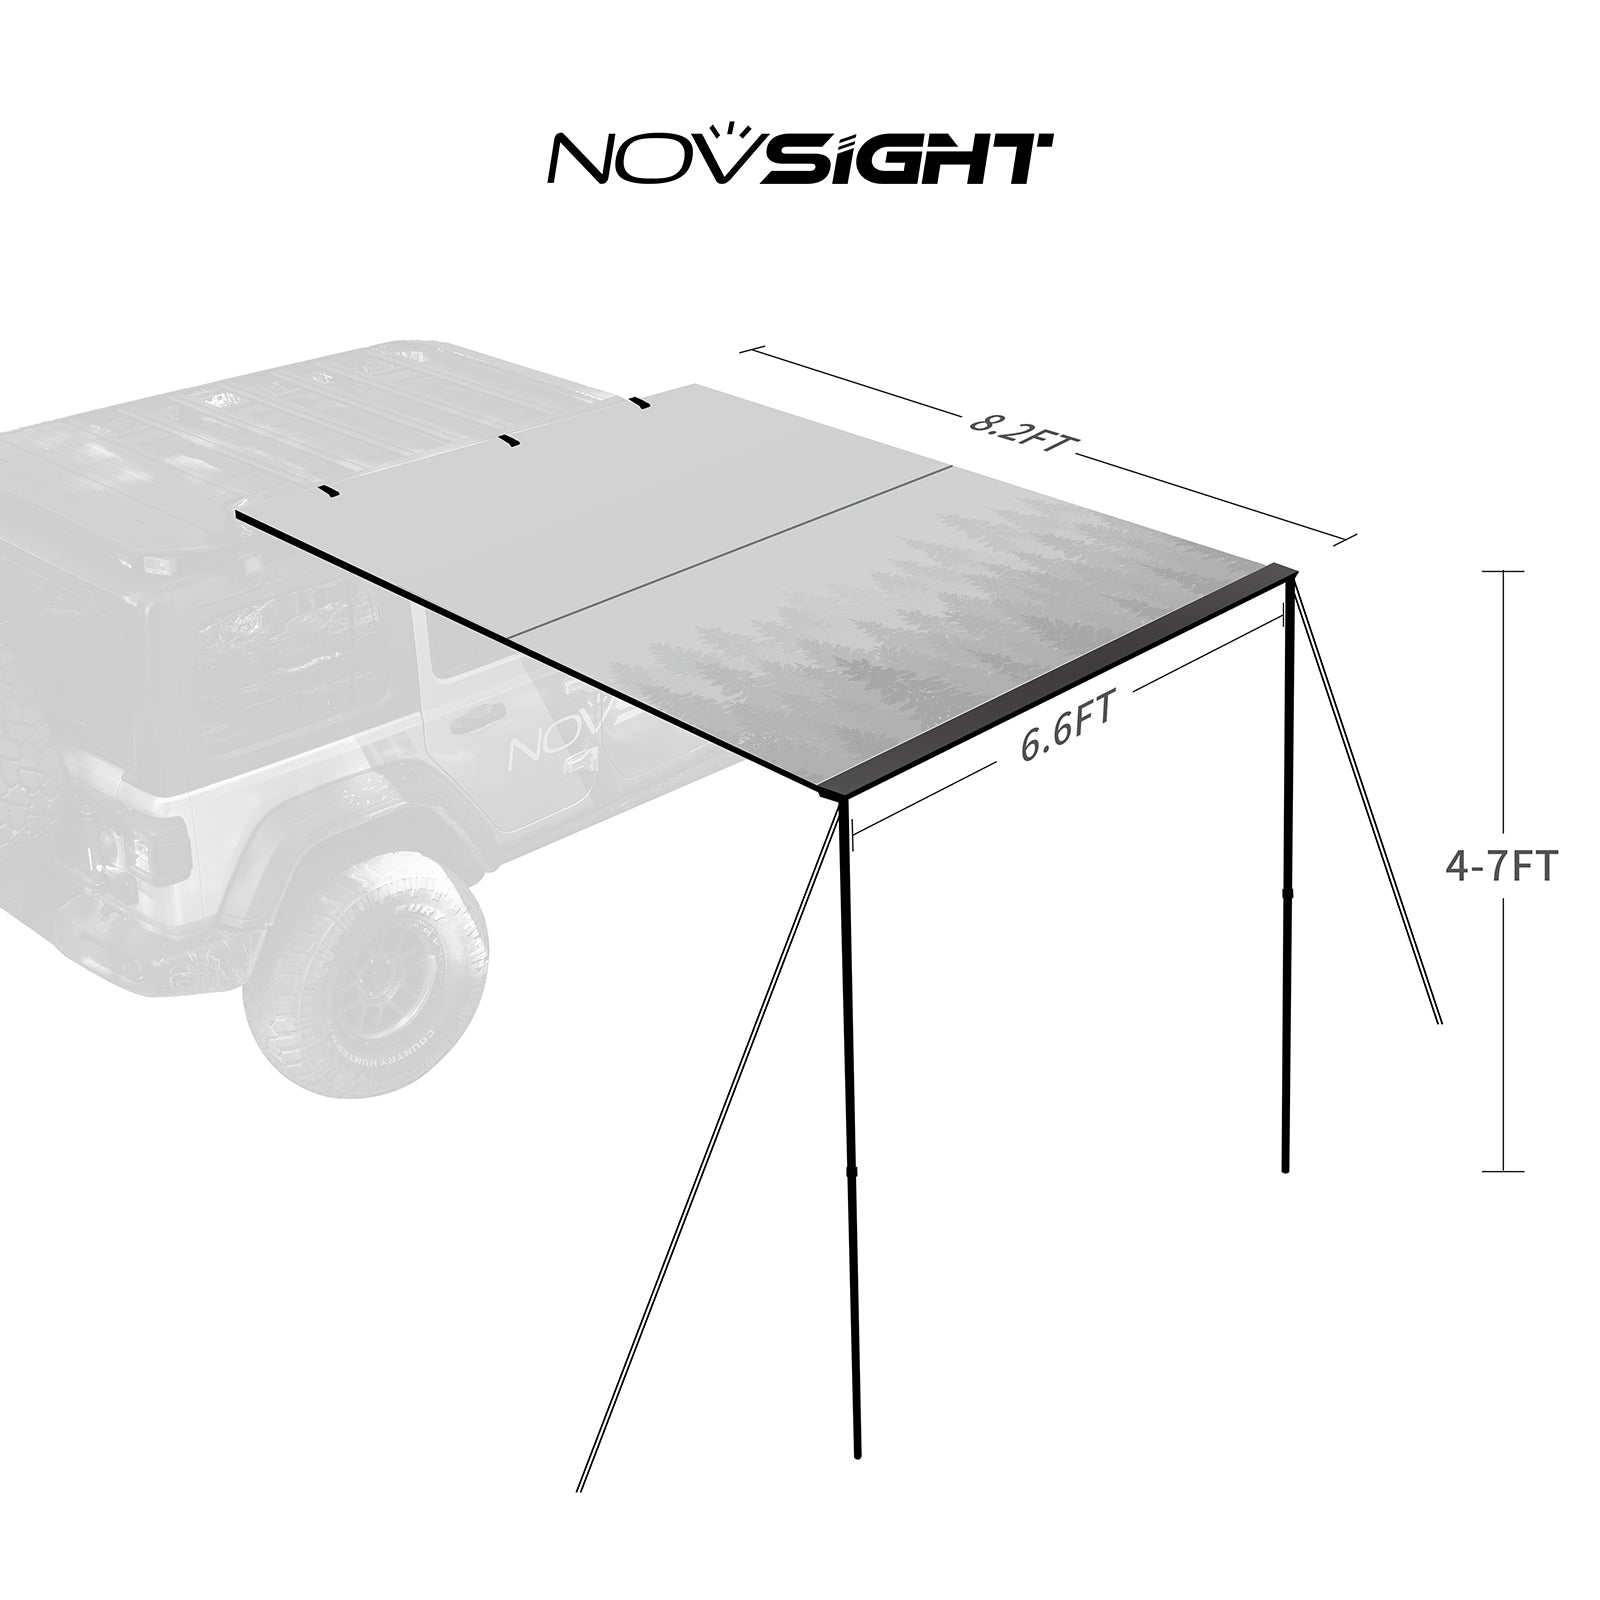 Novsight Car Side Awning Tent Anti UV for Outdoor Camping Overland Shelter for JEEP SUV Van Camper Trailer